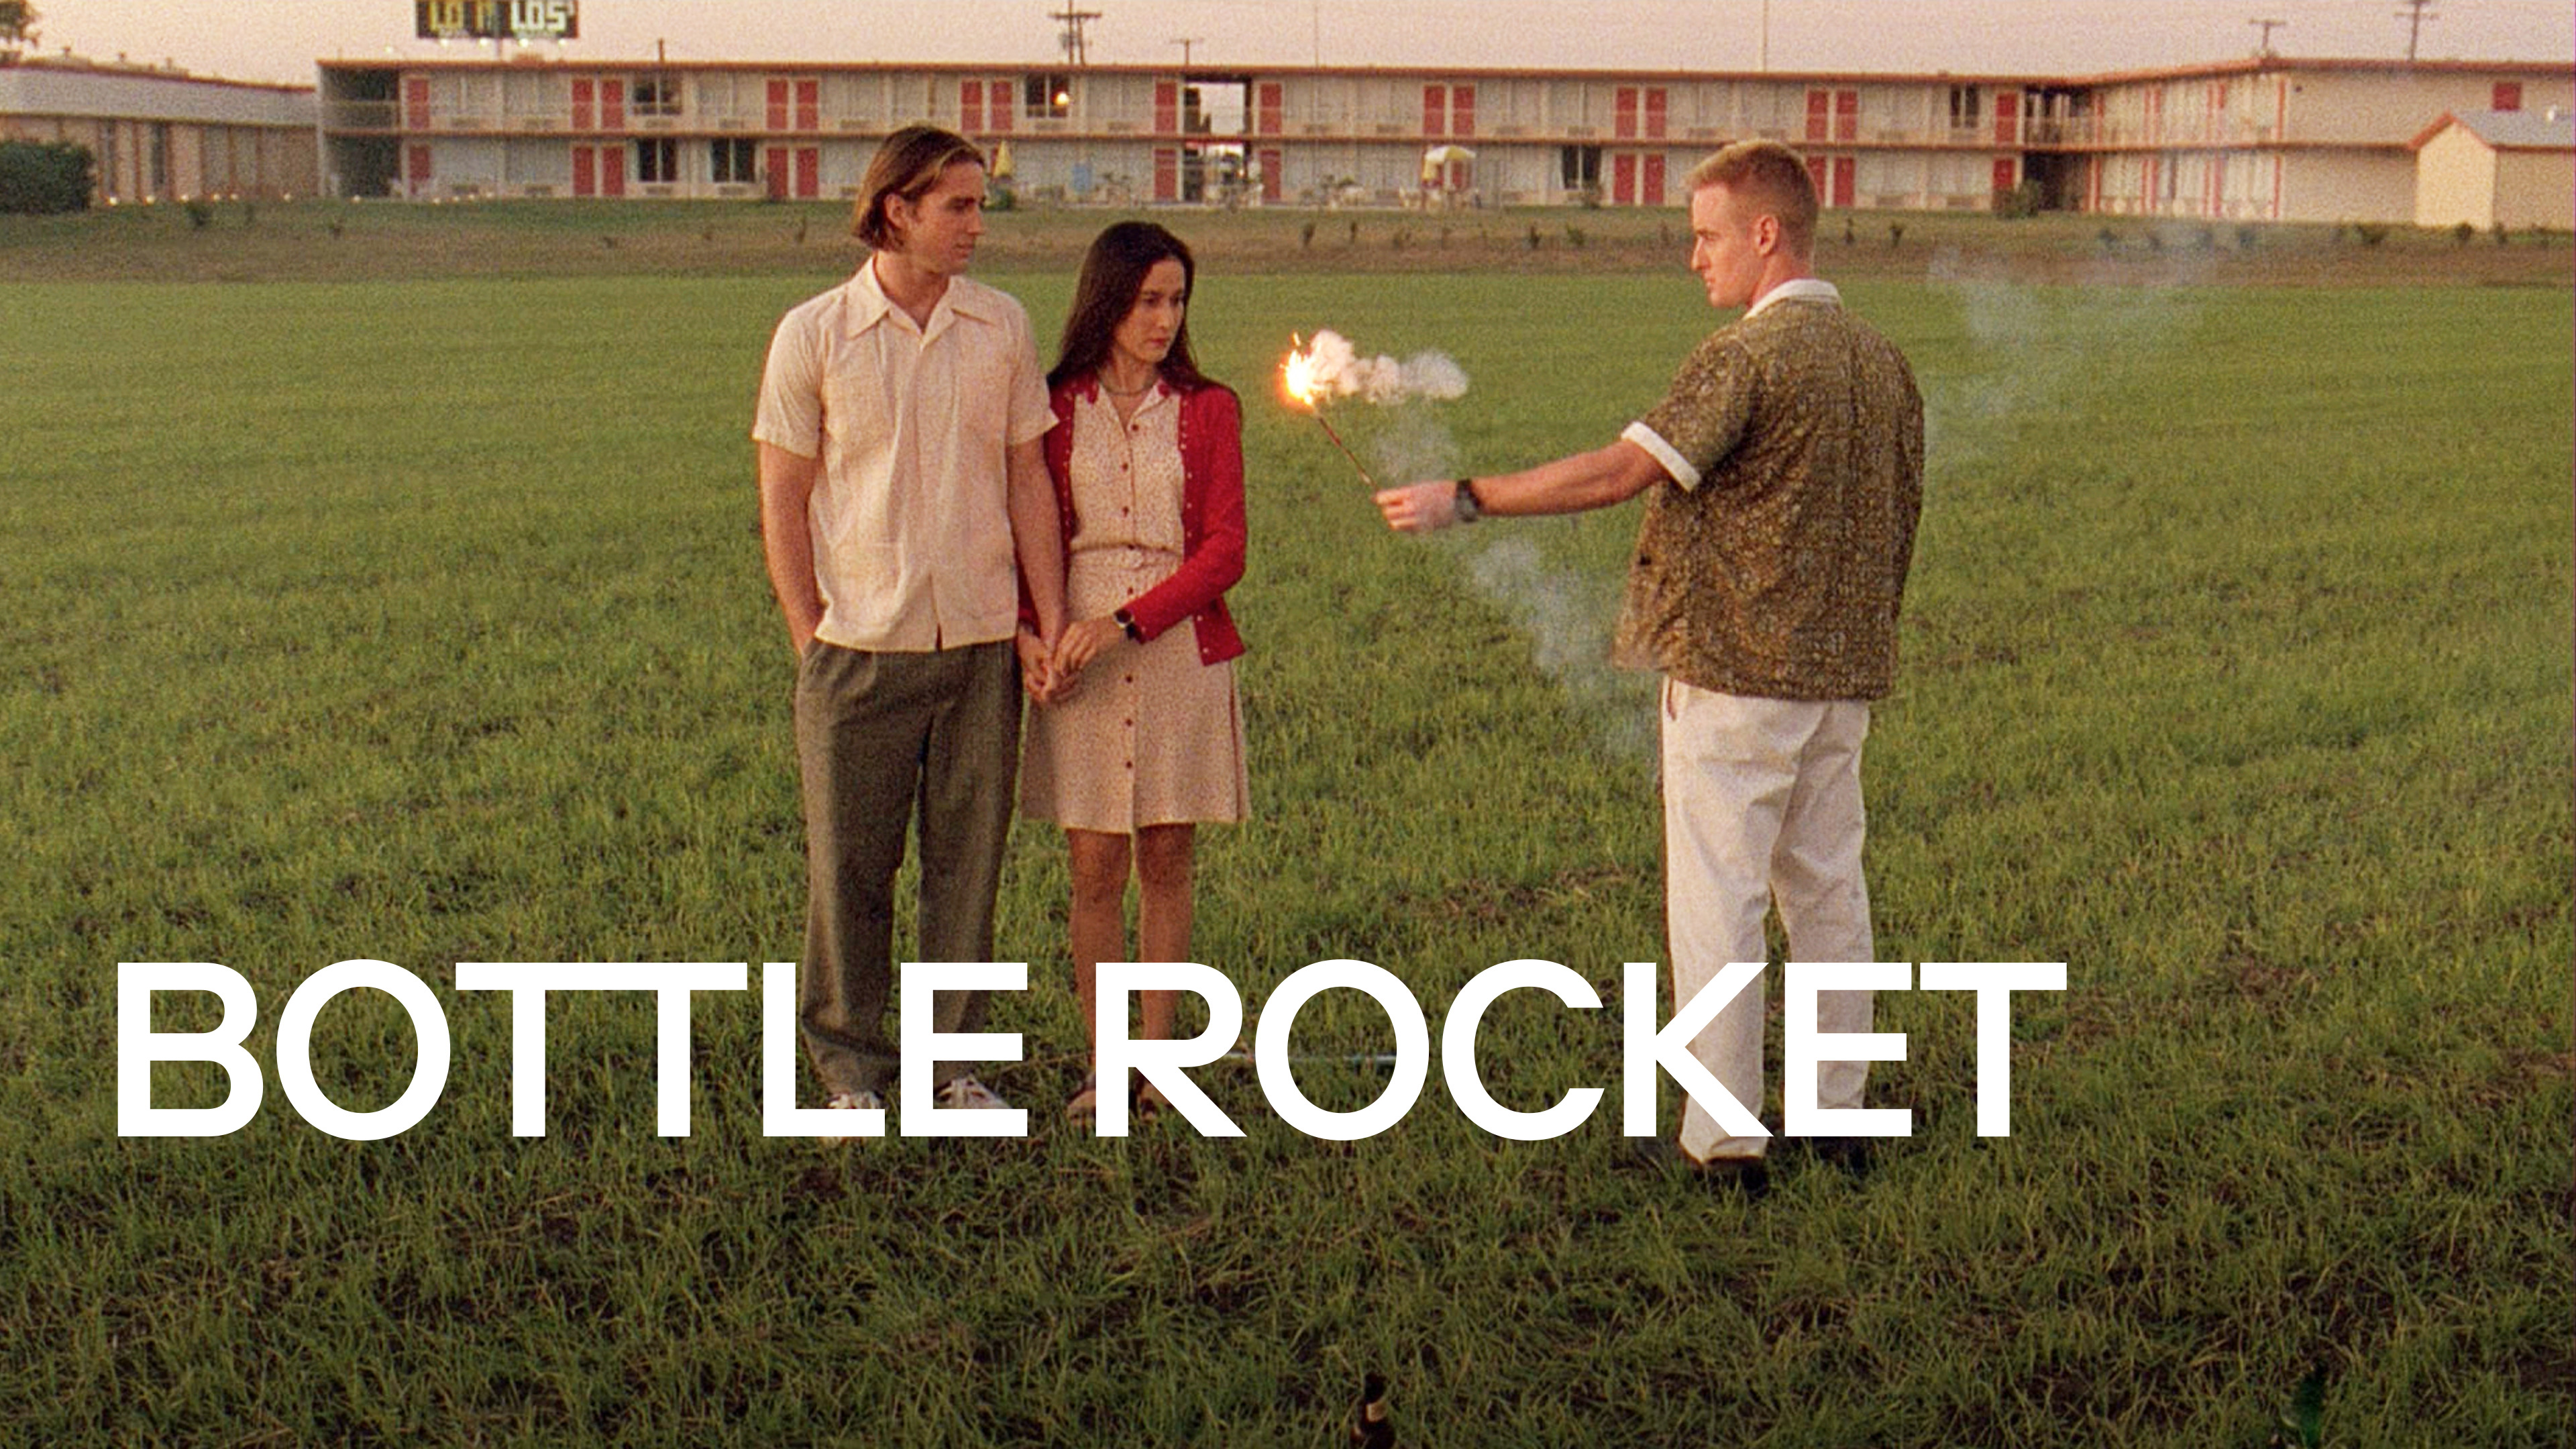 32-facts-about-the-movie-bottle-rocket